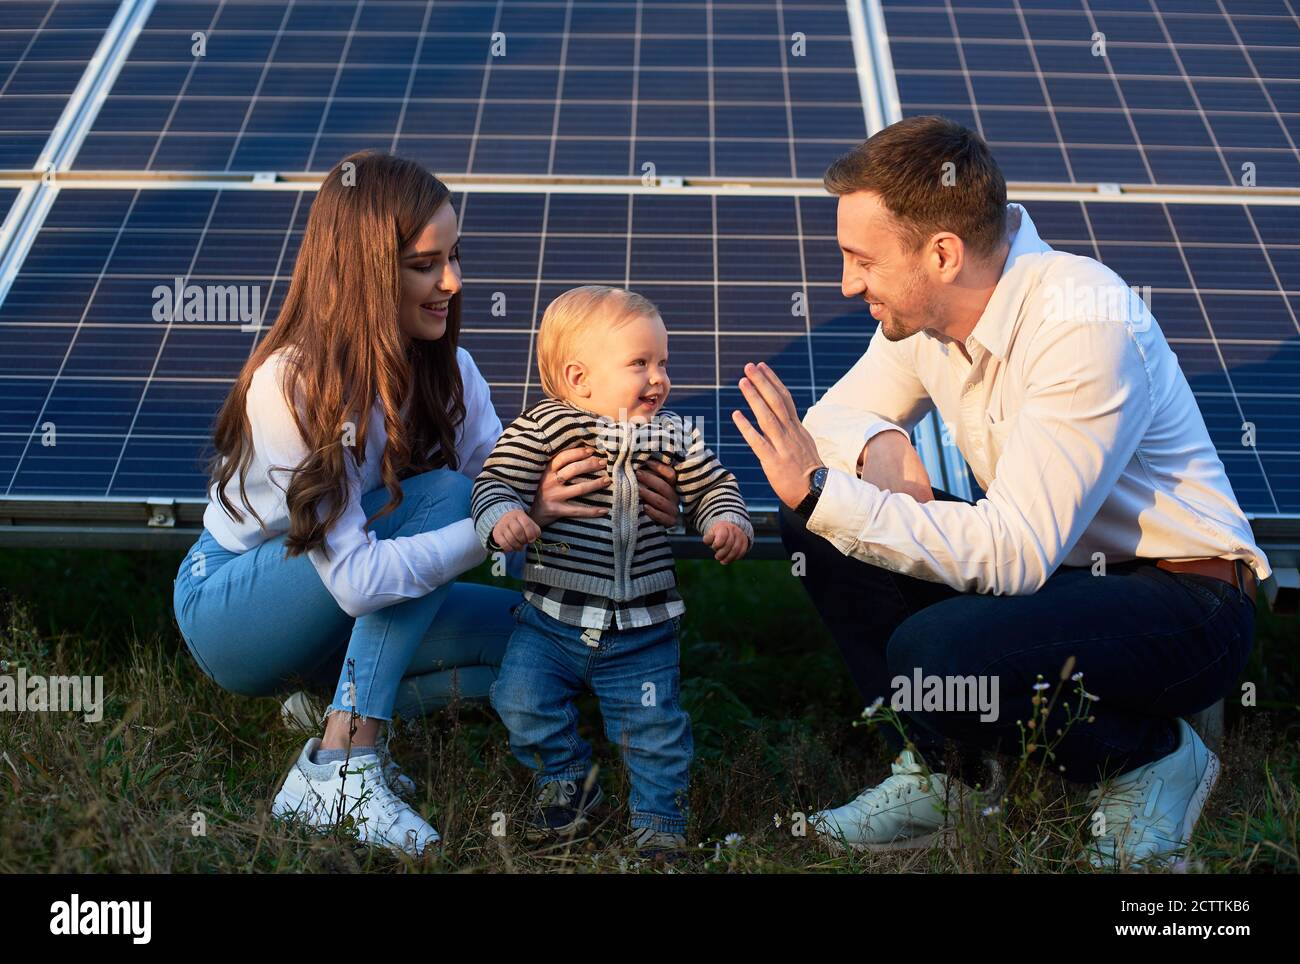 Dad, mom and baby on the background of solar panels on a warm day. The concept of family warmth and comfort in the modern world with continuously advancing technology Stock Photo